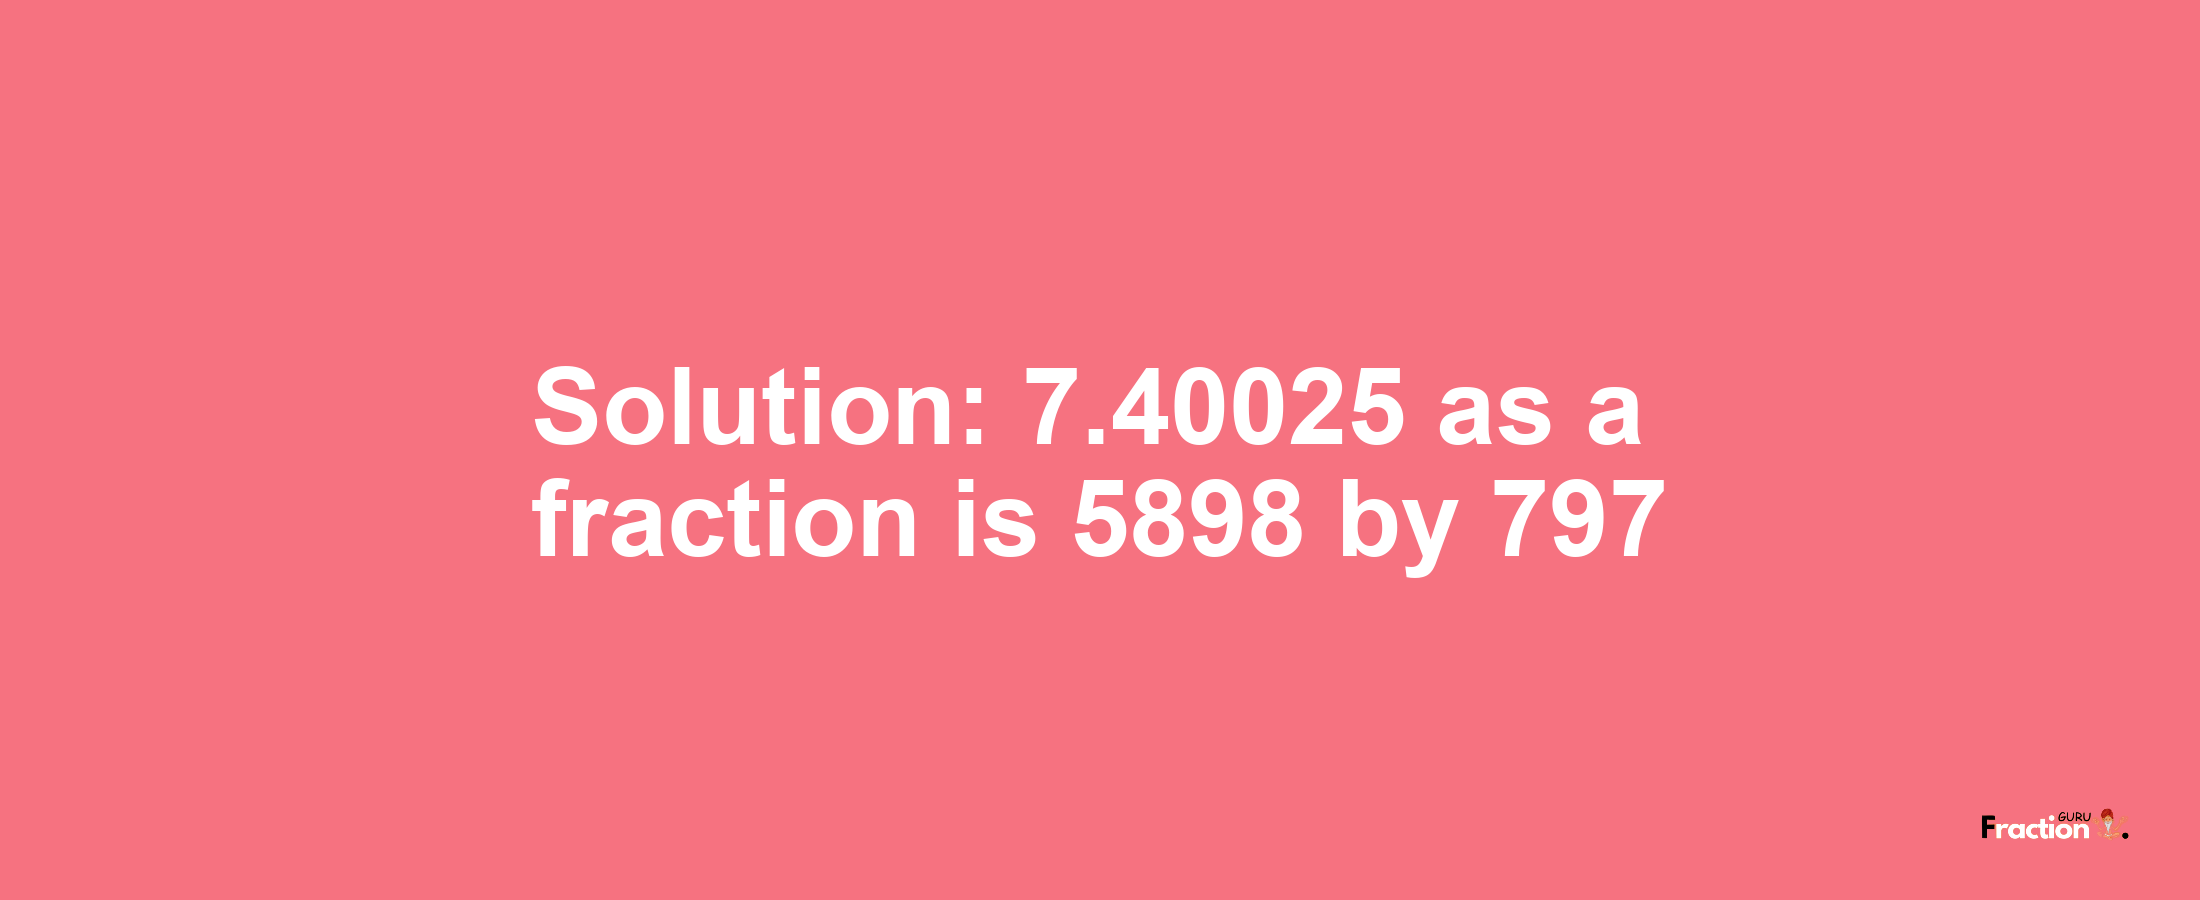 Solution:7.40025 as a fraction is 5898/797